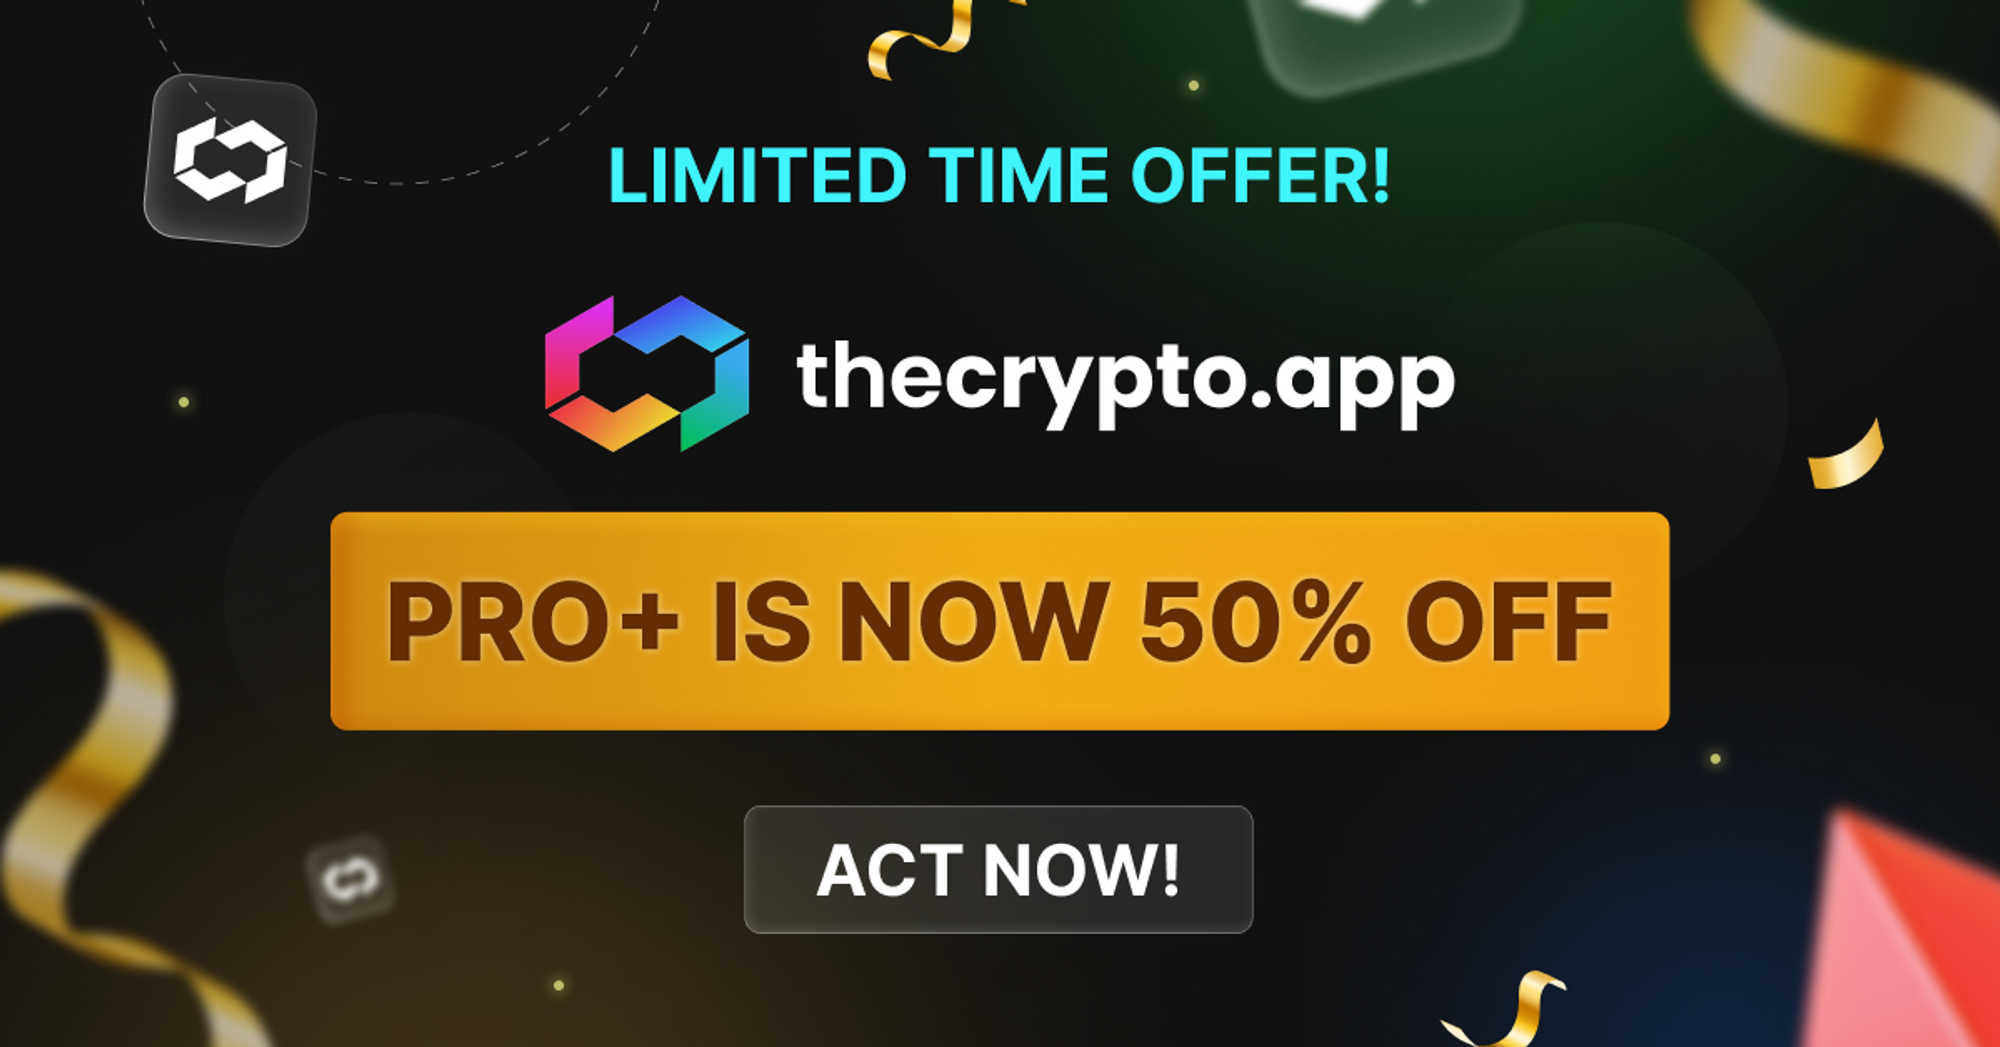 Special Limited-Time Offer: Pro+ is 50% Off!